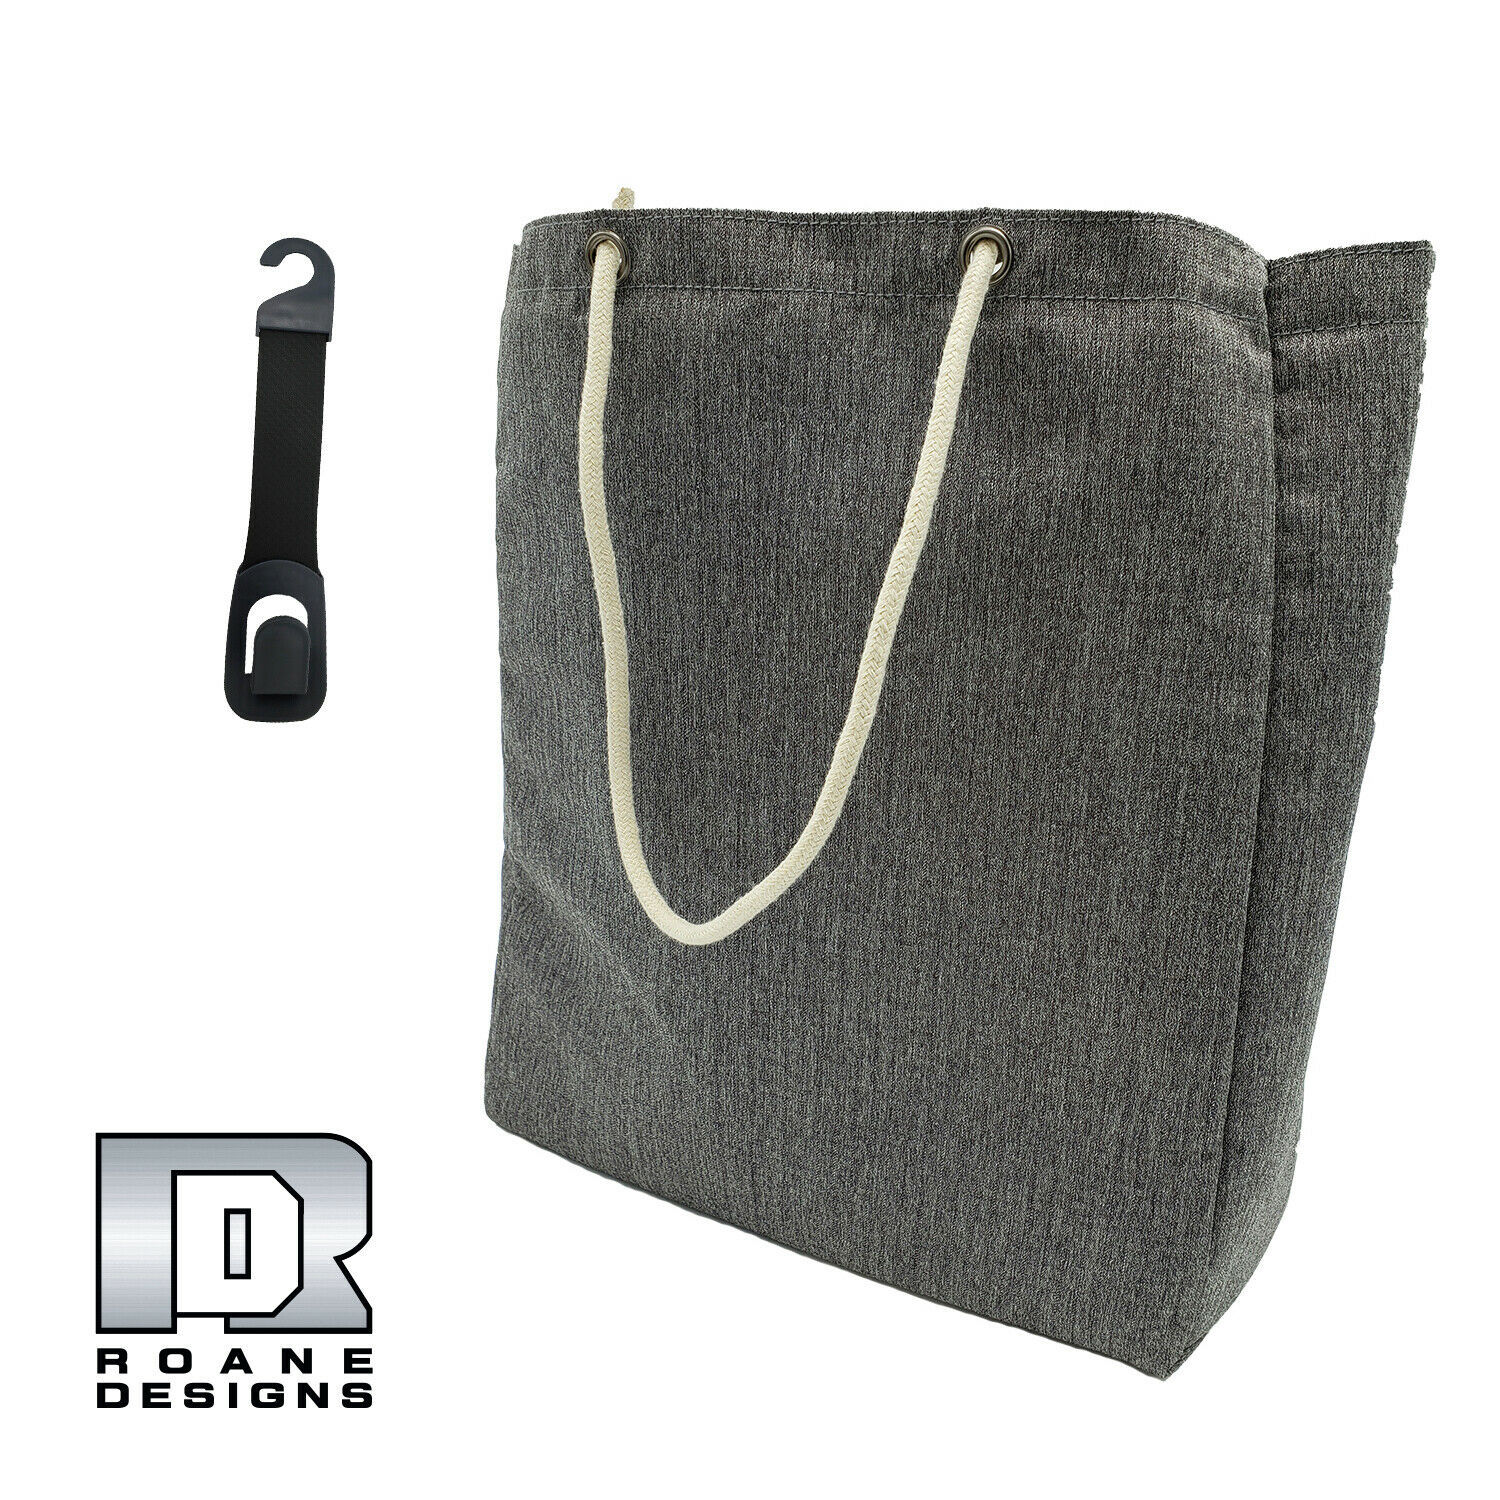 Primary image for Roane Design Grocery Shopping Small Tote Bag & Seat Hook 13" x 15" x 4 3/4"